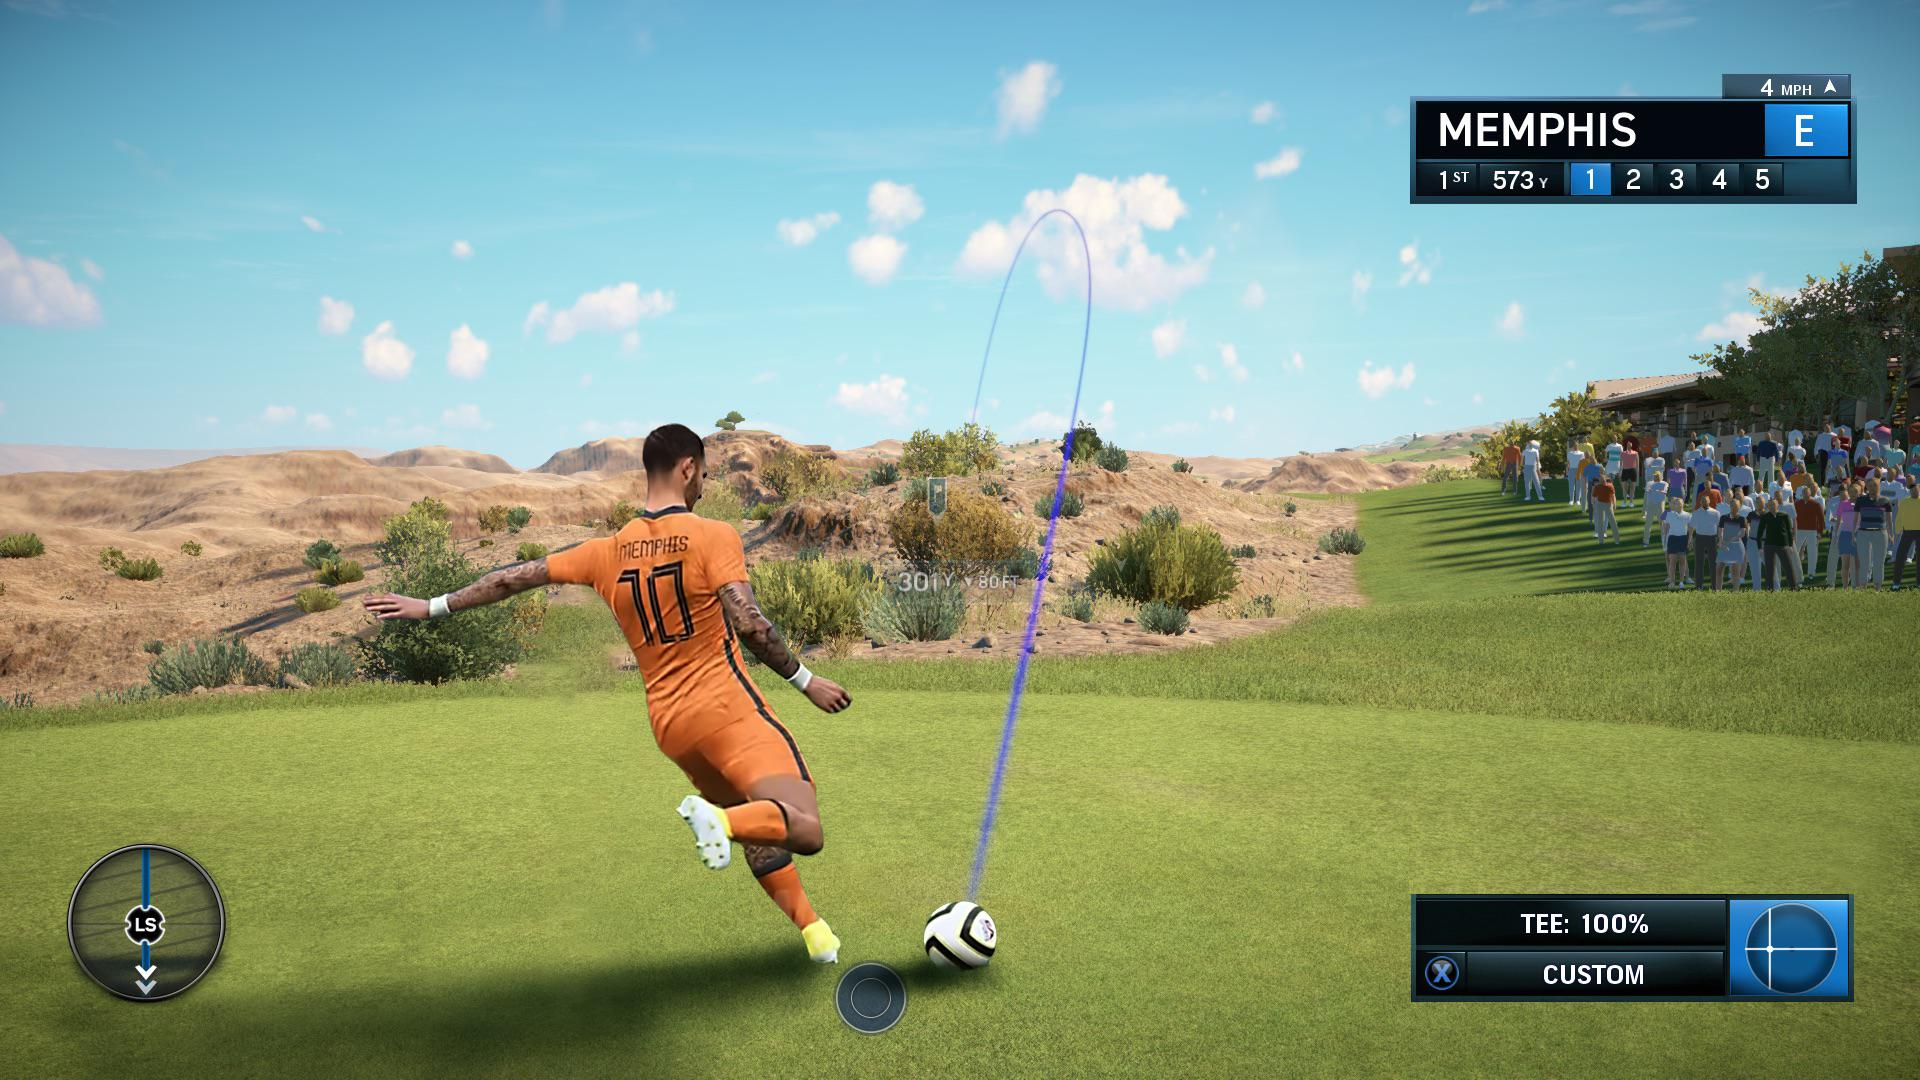 Footgolf concept mode in FIFA